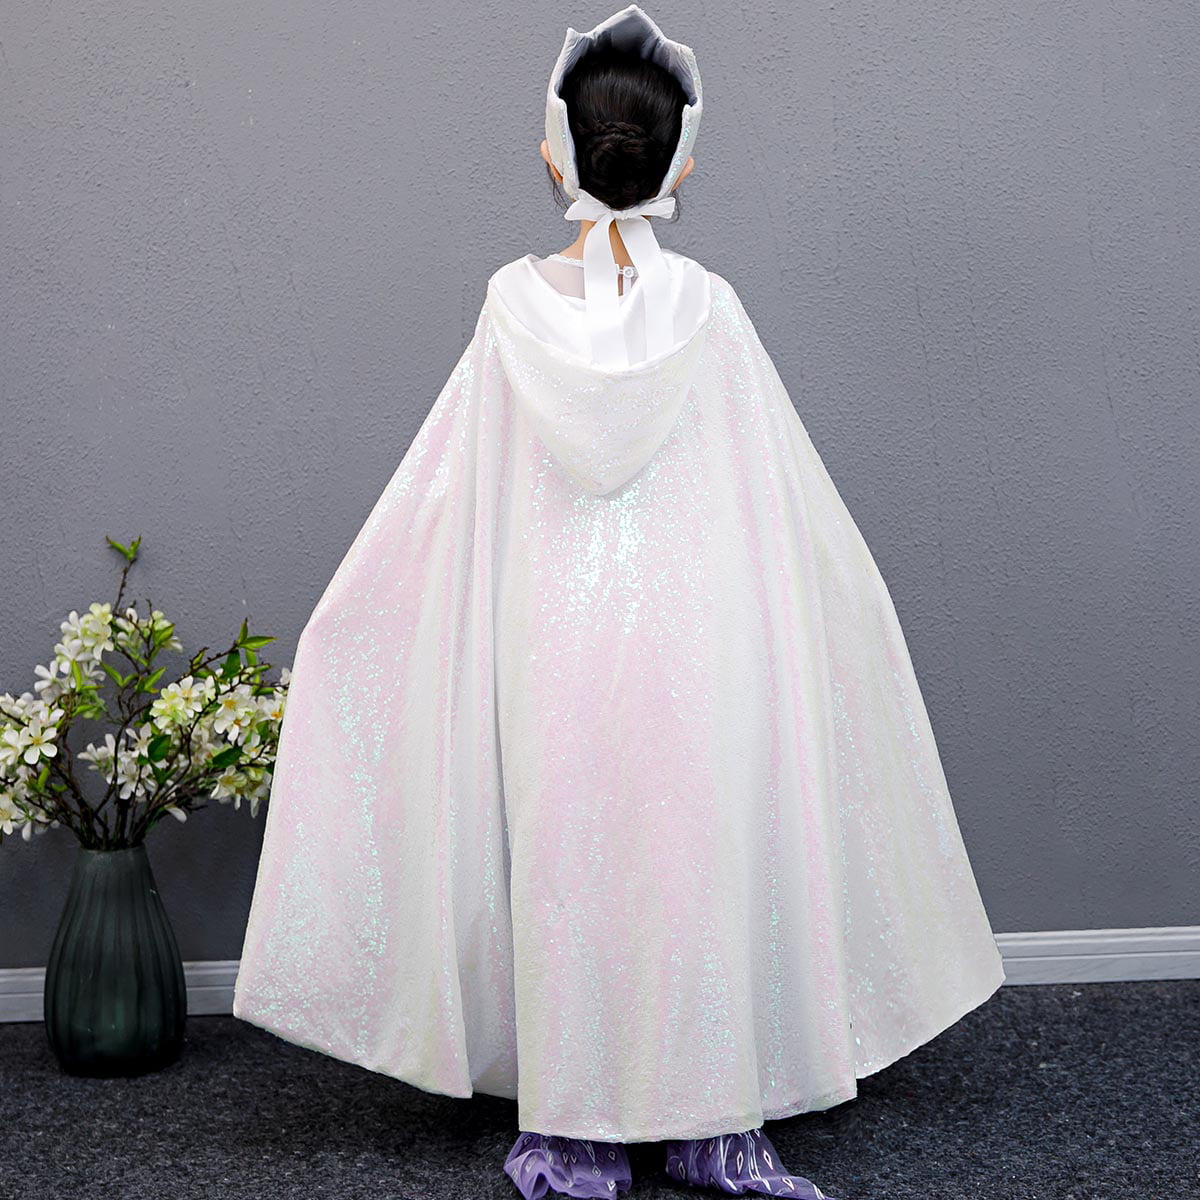 Multifit Princess Capes Colorful Sequins Cloak for Girls-Halloween Birthday Party Costumes Dress up